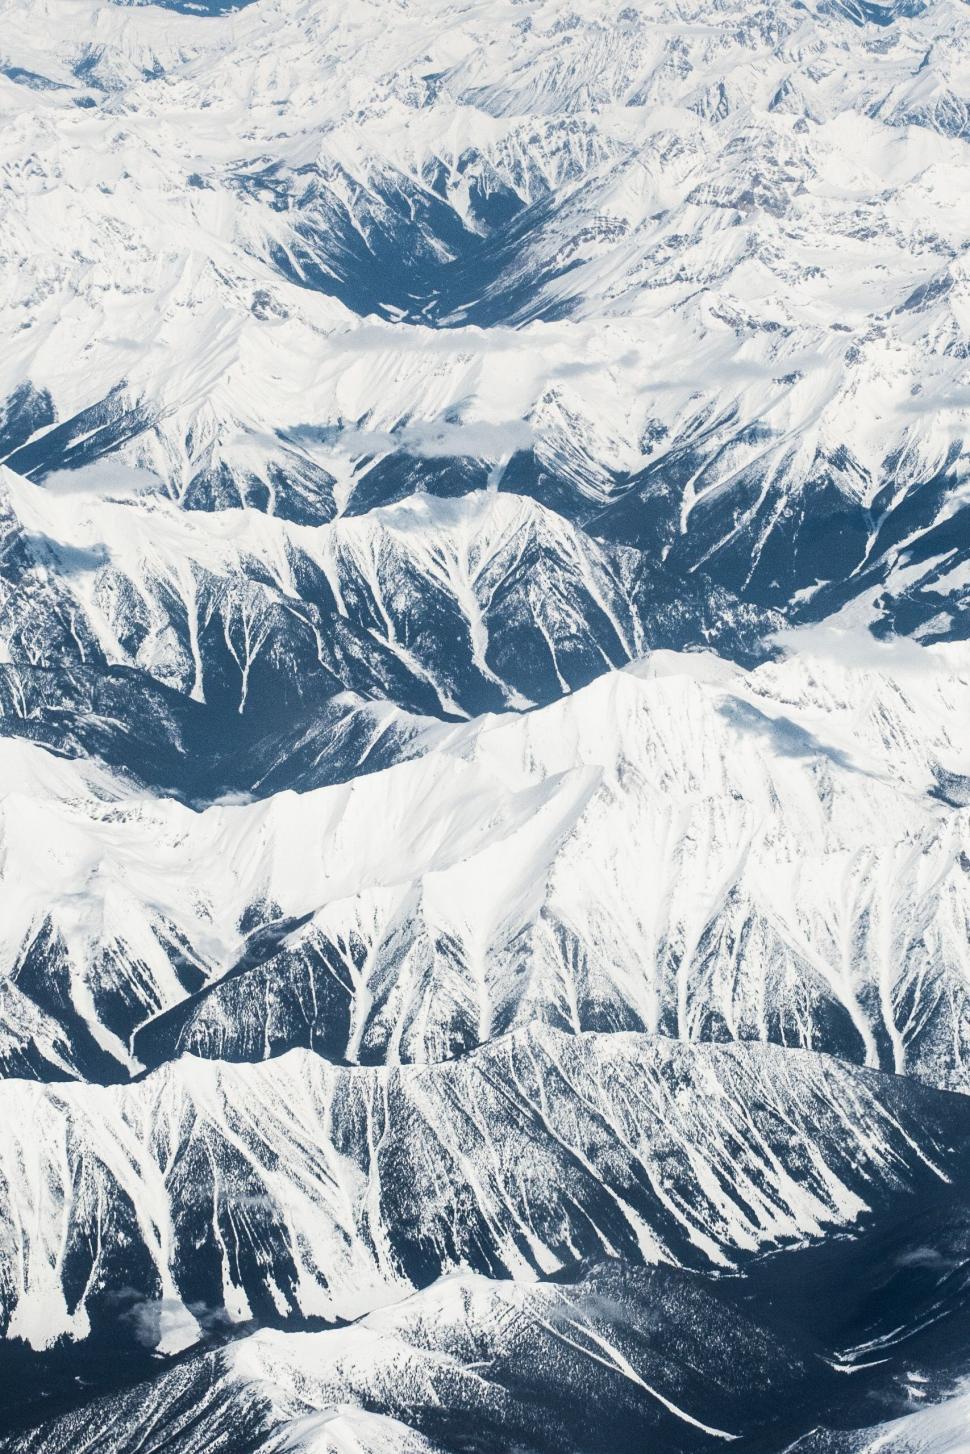 Free Image of Snow capped Mountains  